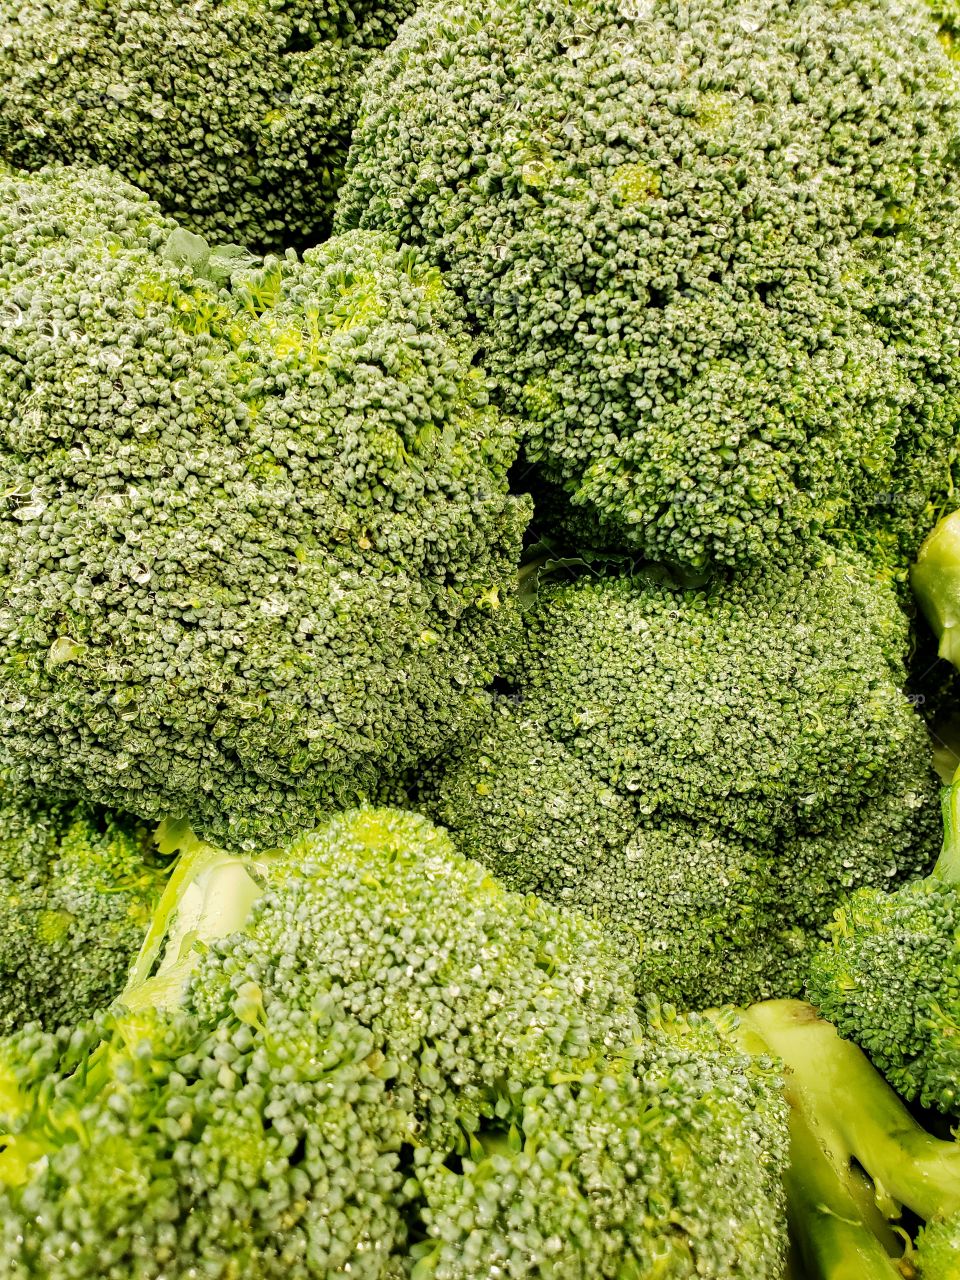 Closeup of details and texture of heads of green broccoli at the local market